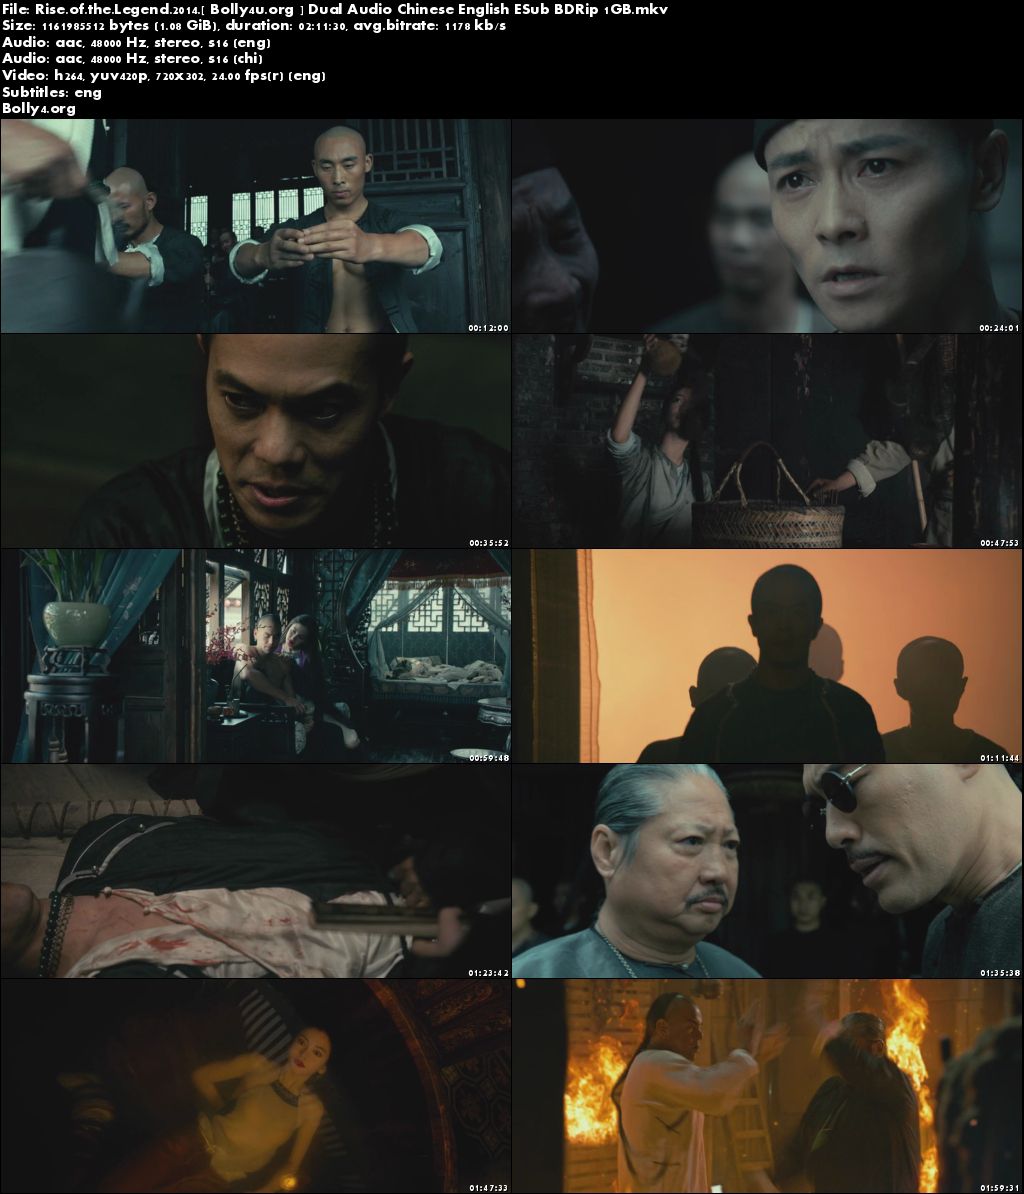 Rise of The Legend 2014 BDRip 400MB Chinese English Dual Audio 480p Download